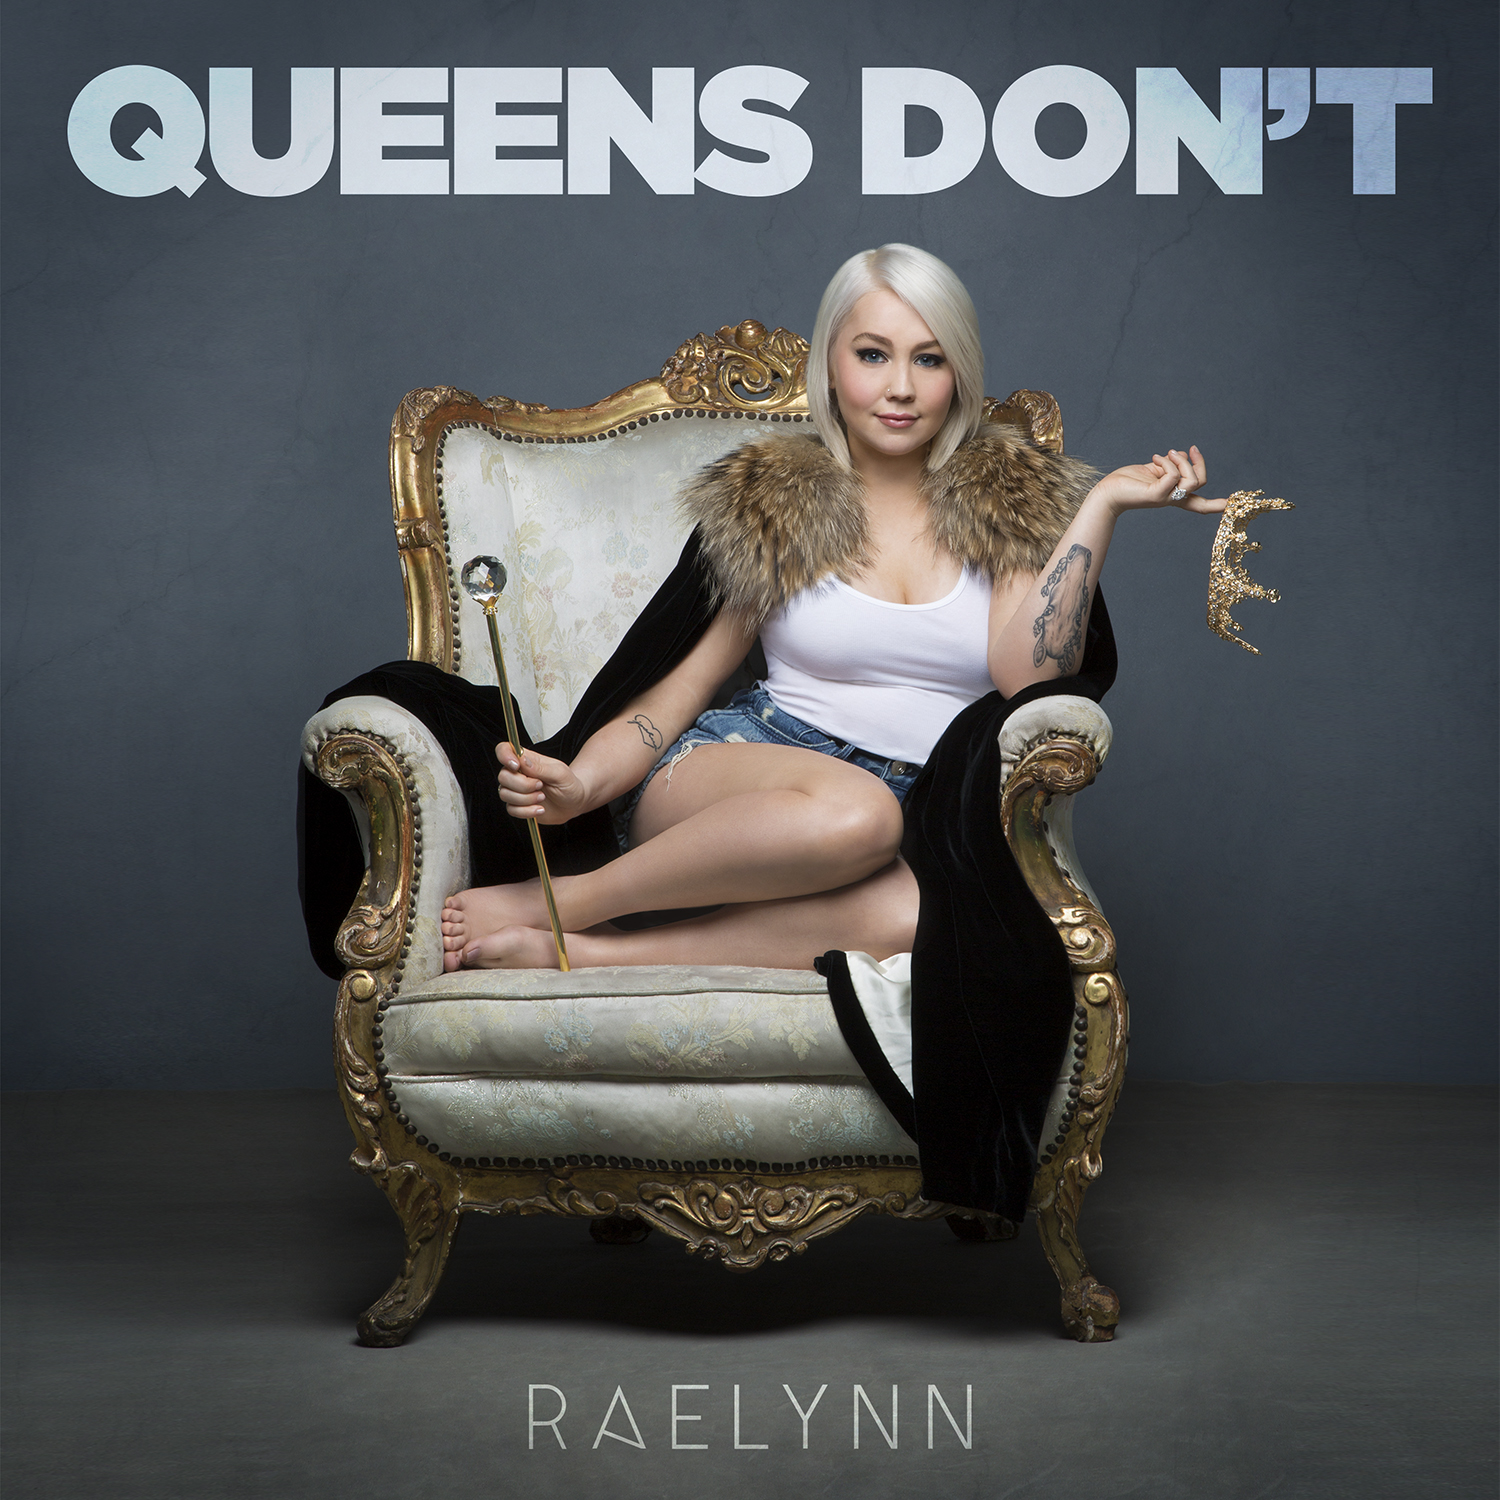 RaeLynn Wrote New Single ‘Queens Don’t’ Because She “Wants Everyone to See the Worth in Themselves” – Exclusive